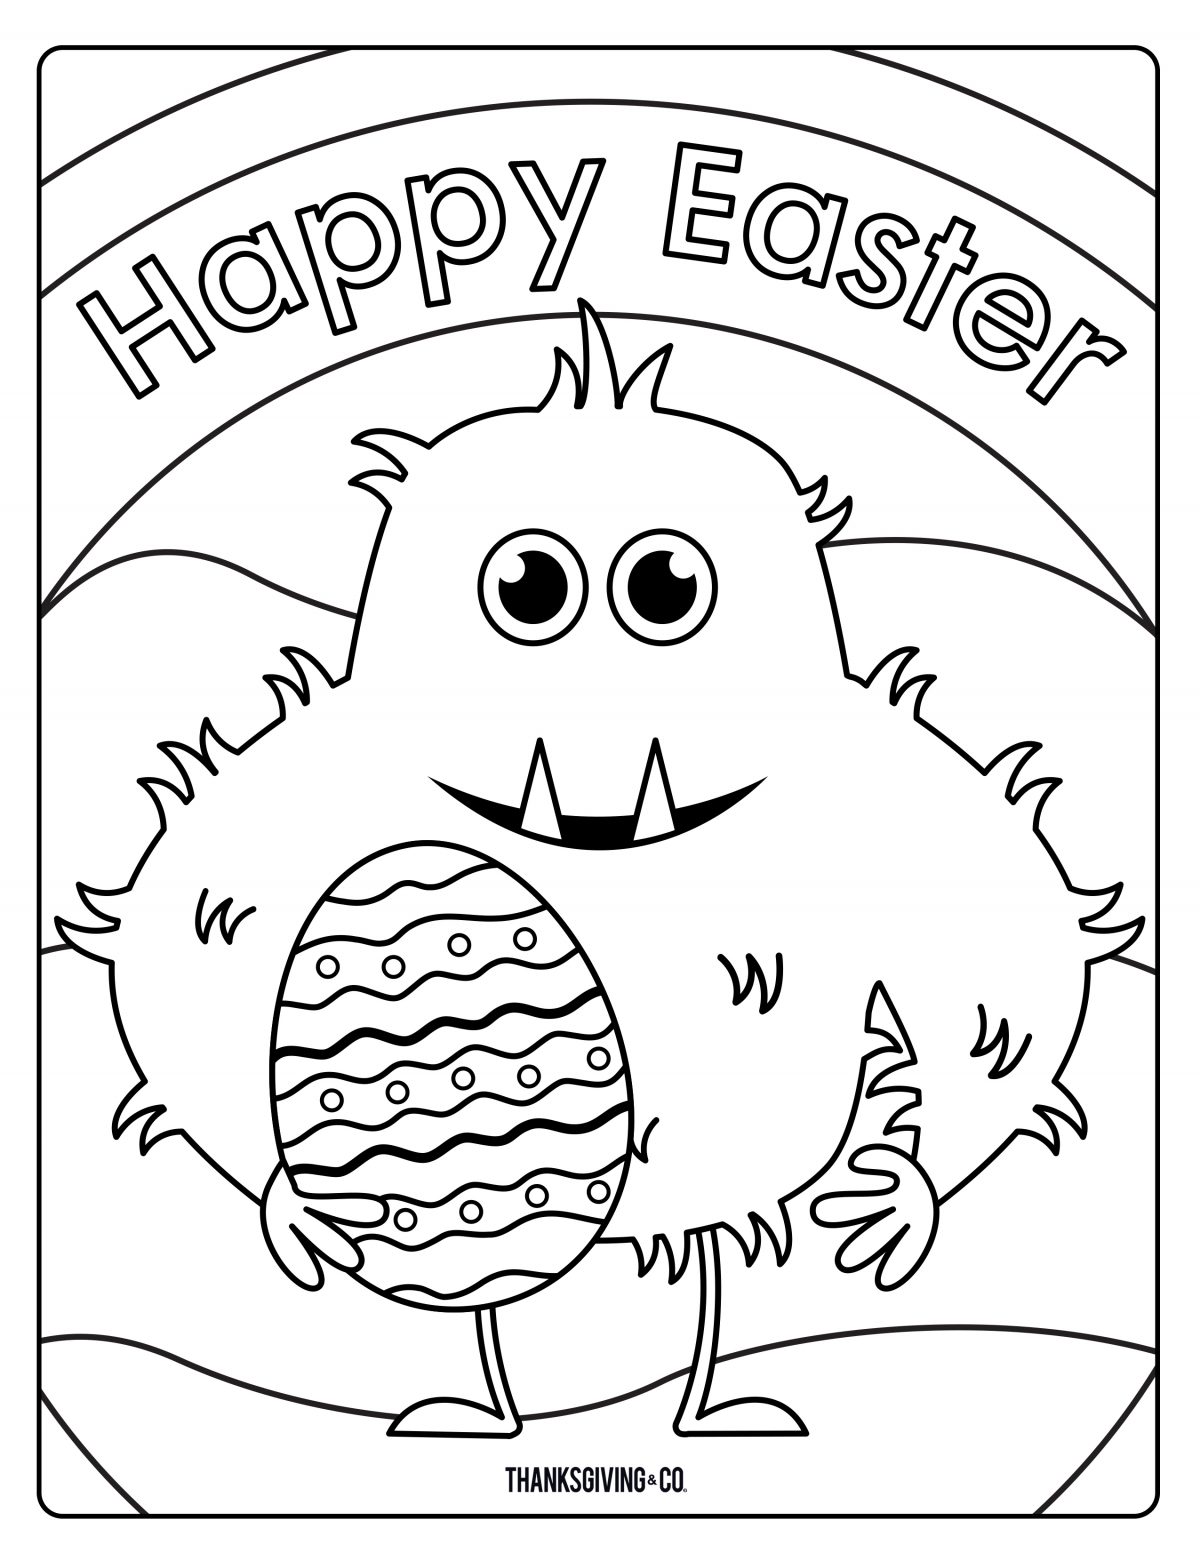 Easter coloring page - Easter monster